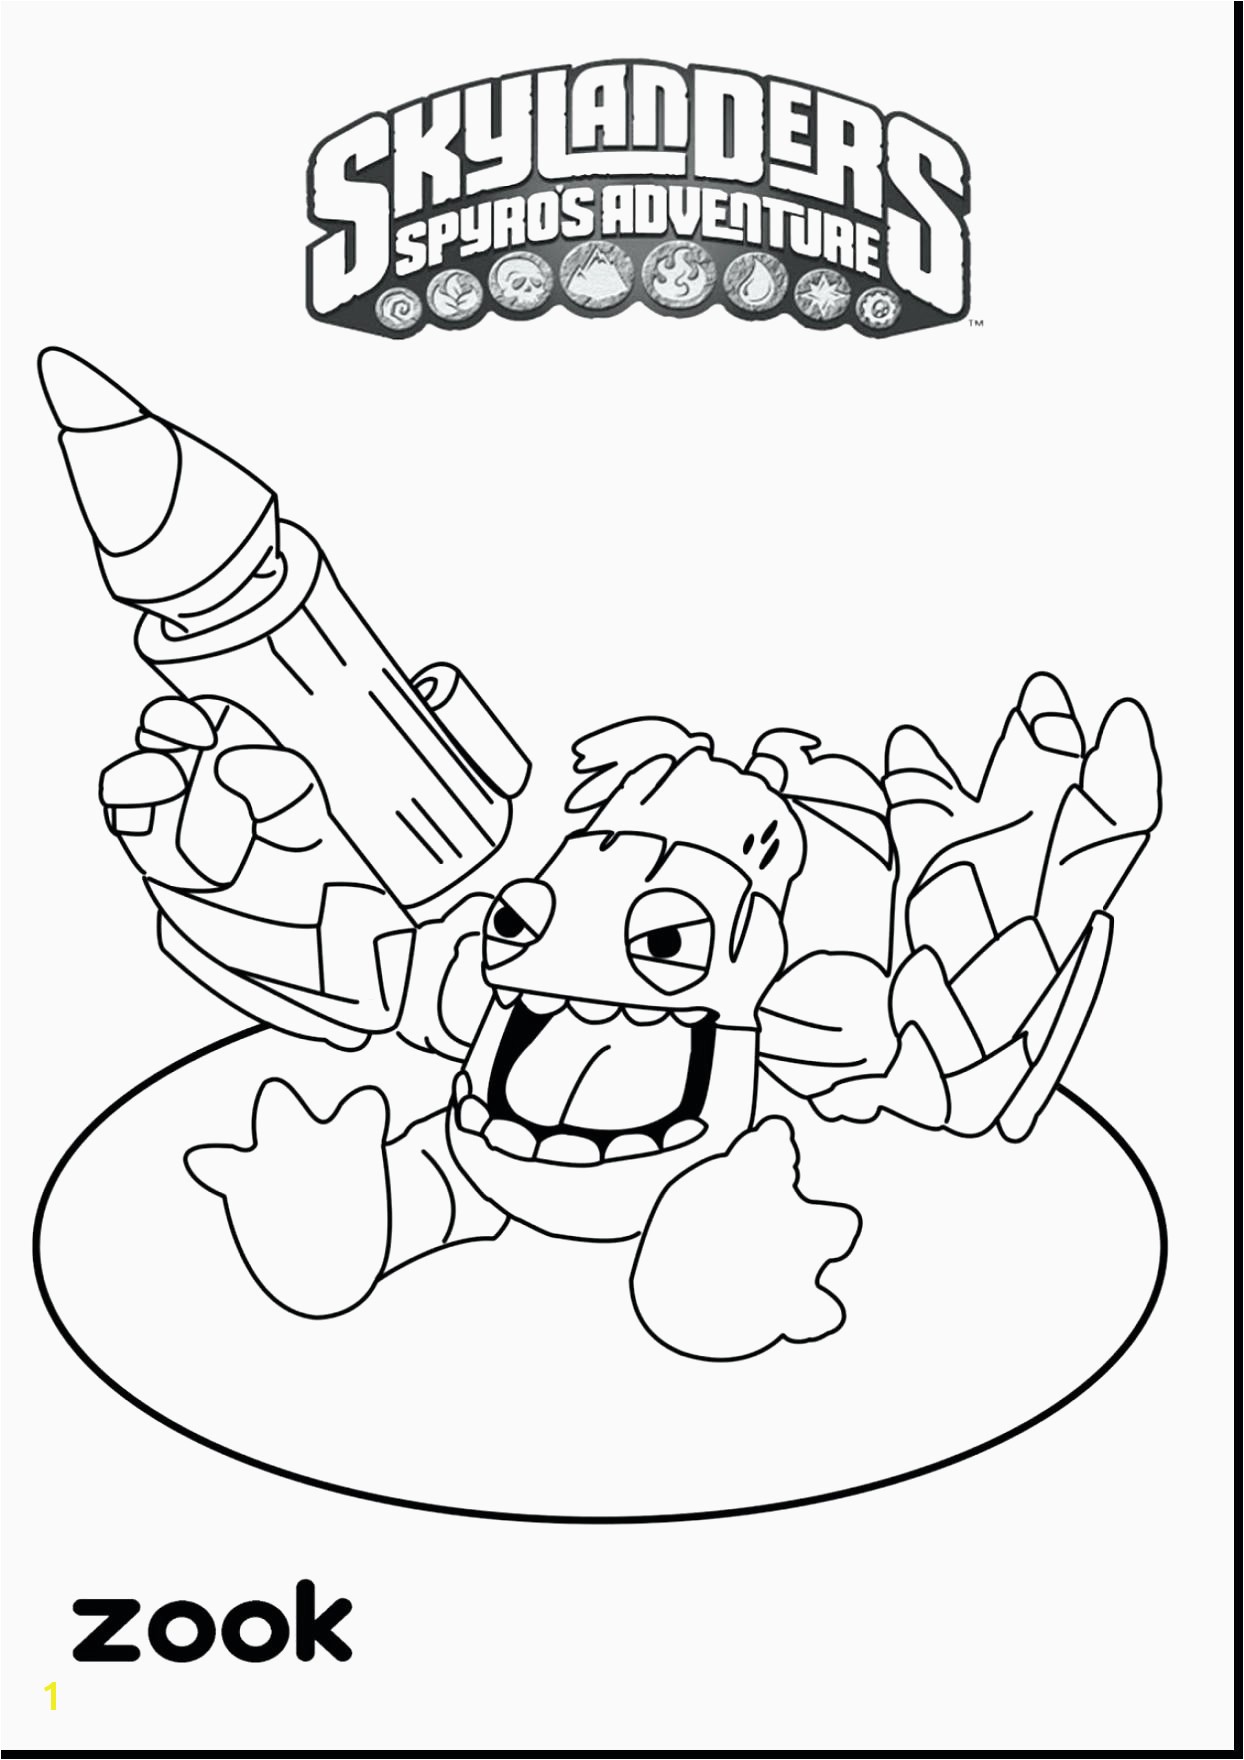 Coloring Book Pages Of Babies Coloring Book Baby Beautiful Baby Coloring Pages New Media Cache Ec0